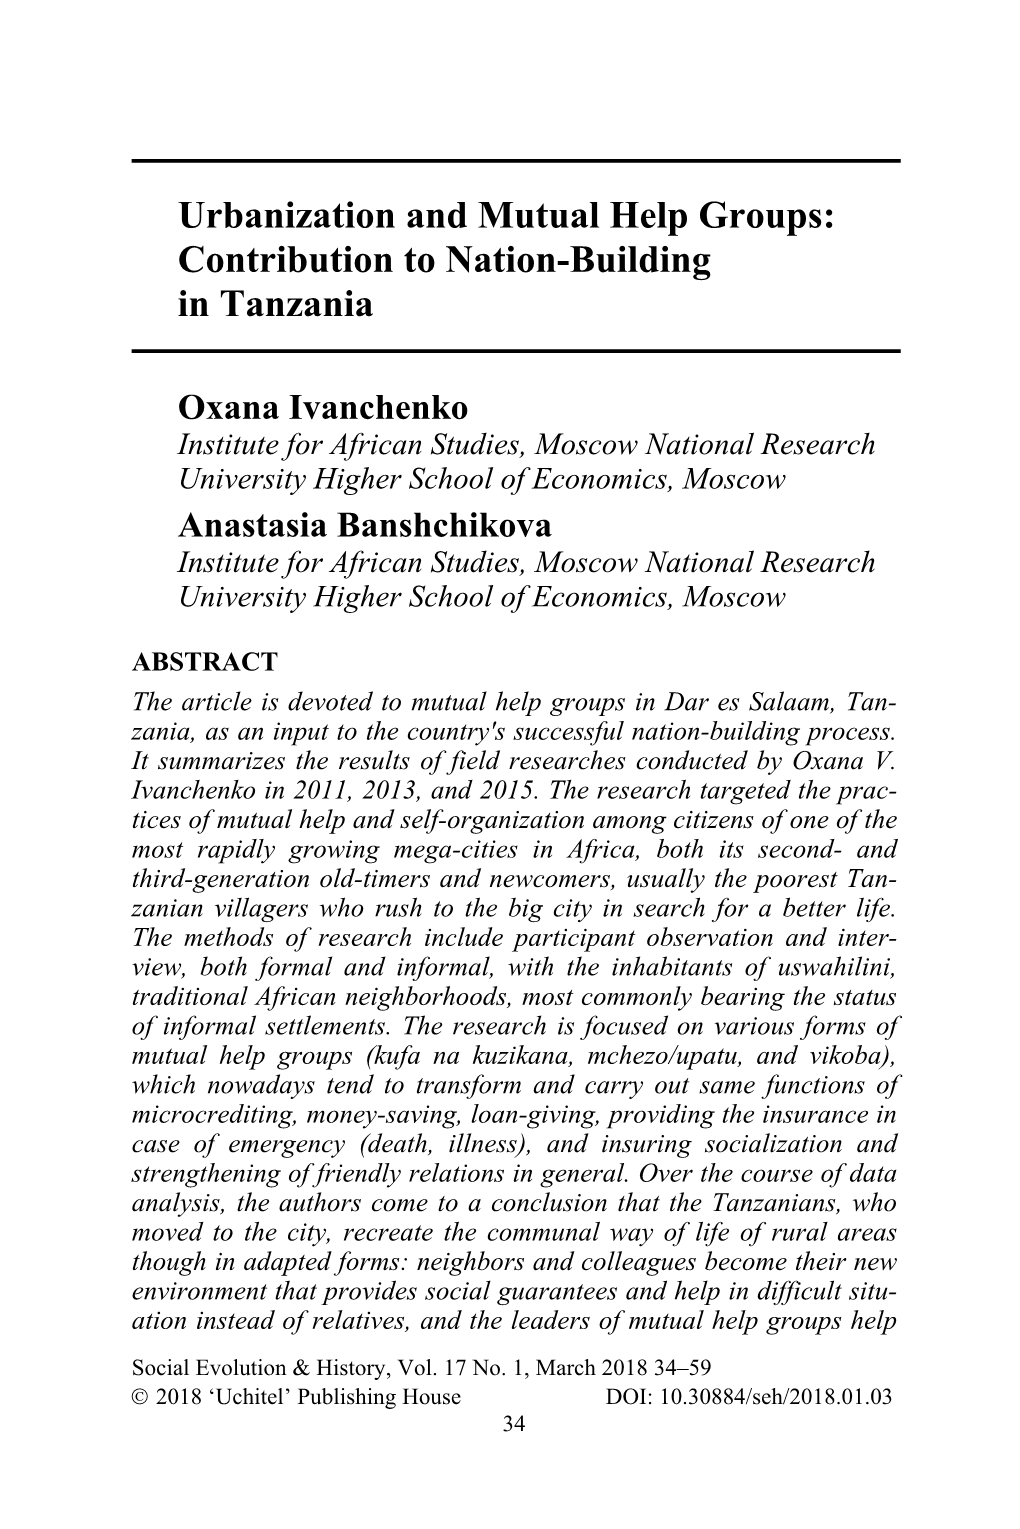 Contribution to Nation-Building in Tanzania